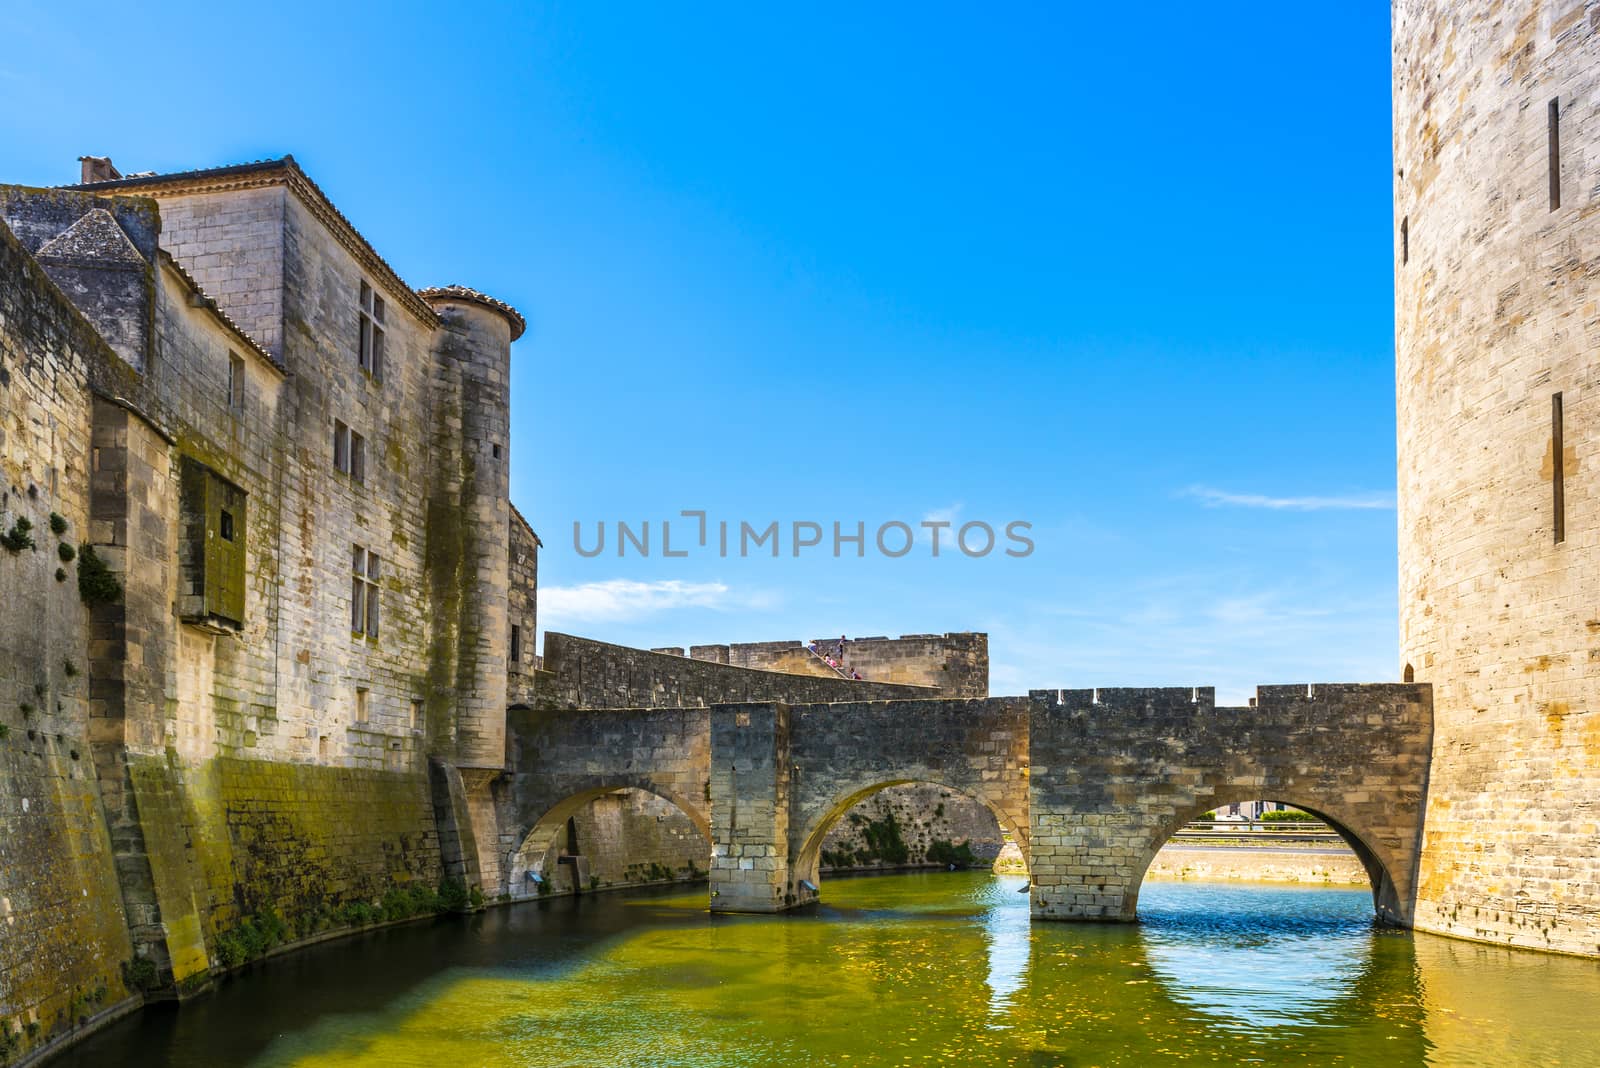 The moats surrounding the city of Aigues-Mortes and the bridge spanning them, which connects the city to the tower of Constance.